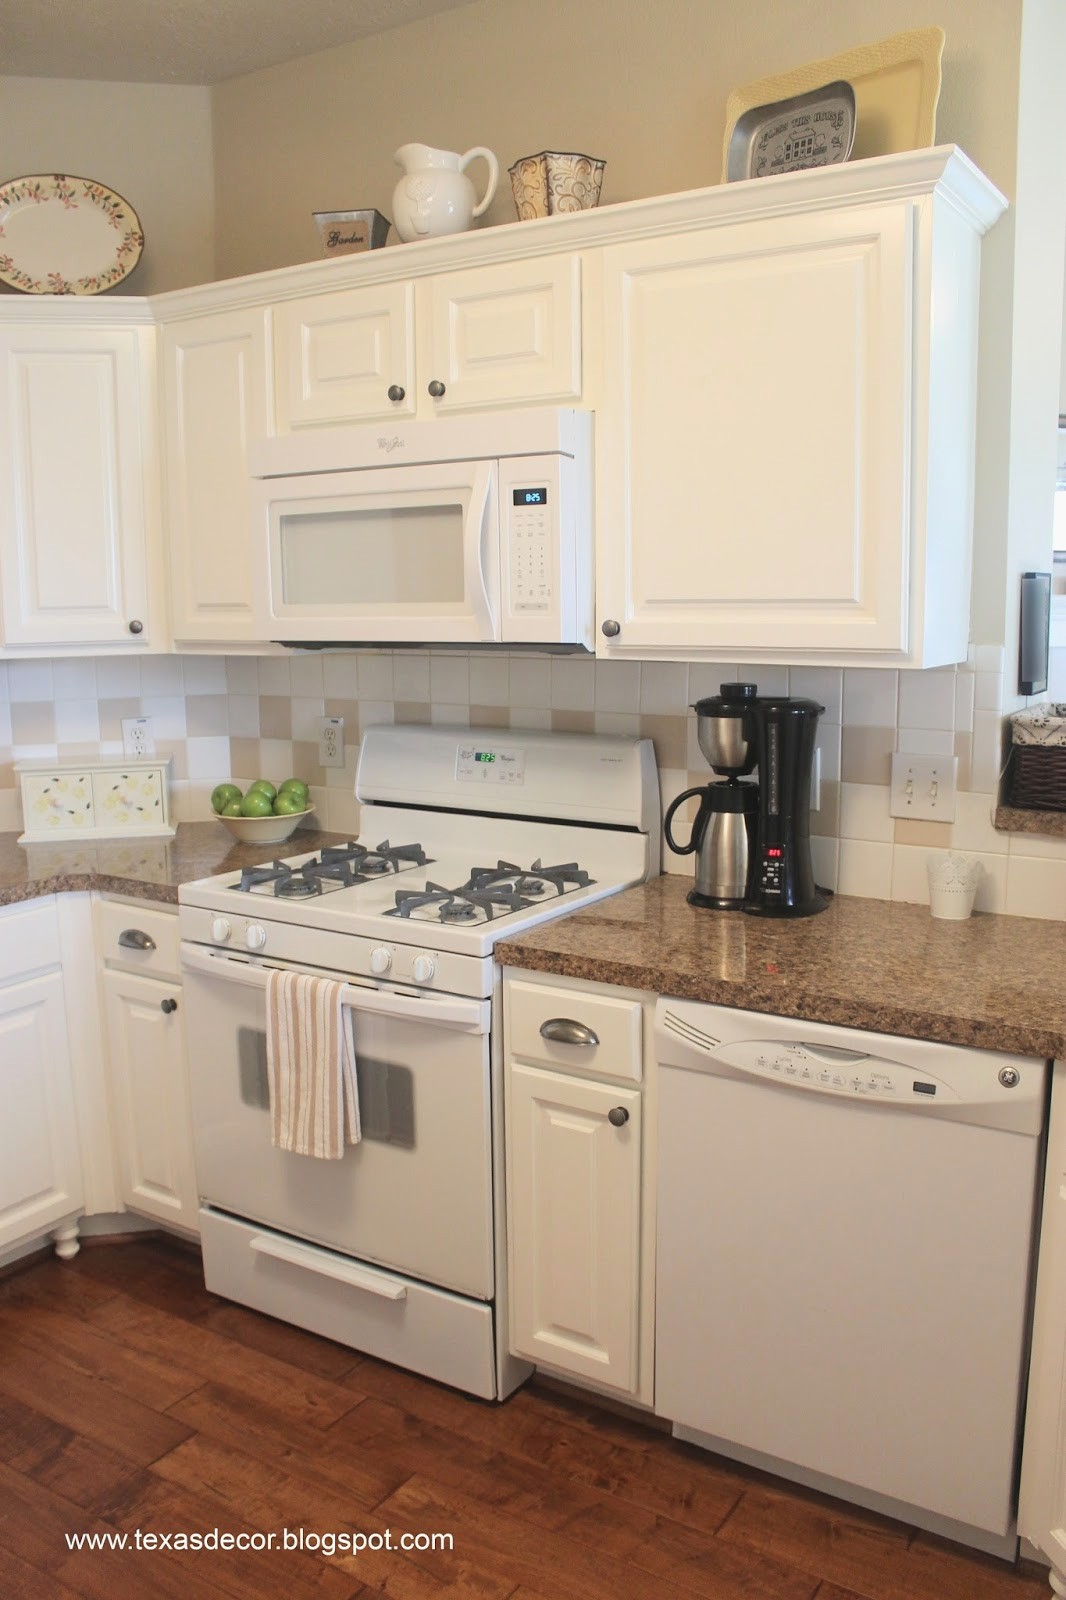 White Kitchen Cabinets With White Appliances: Food for Thought ...